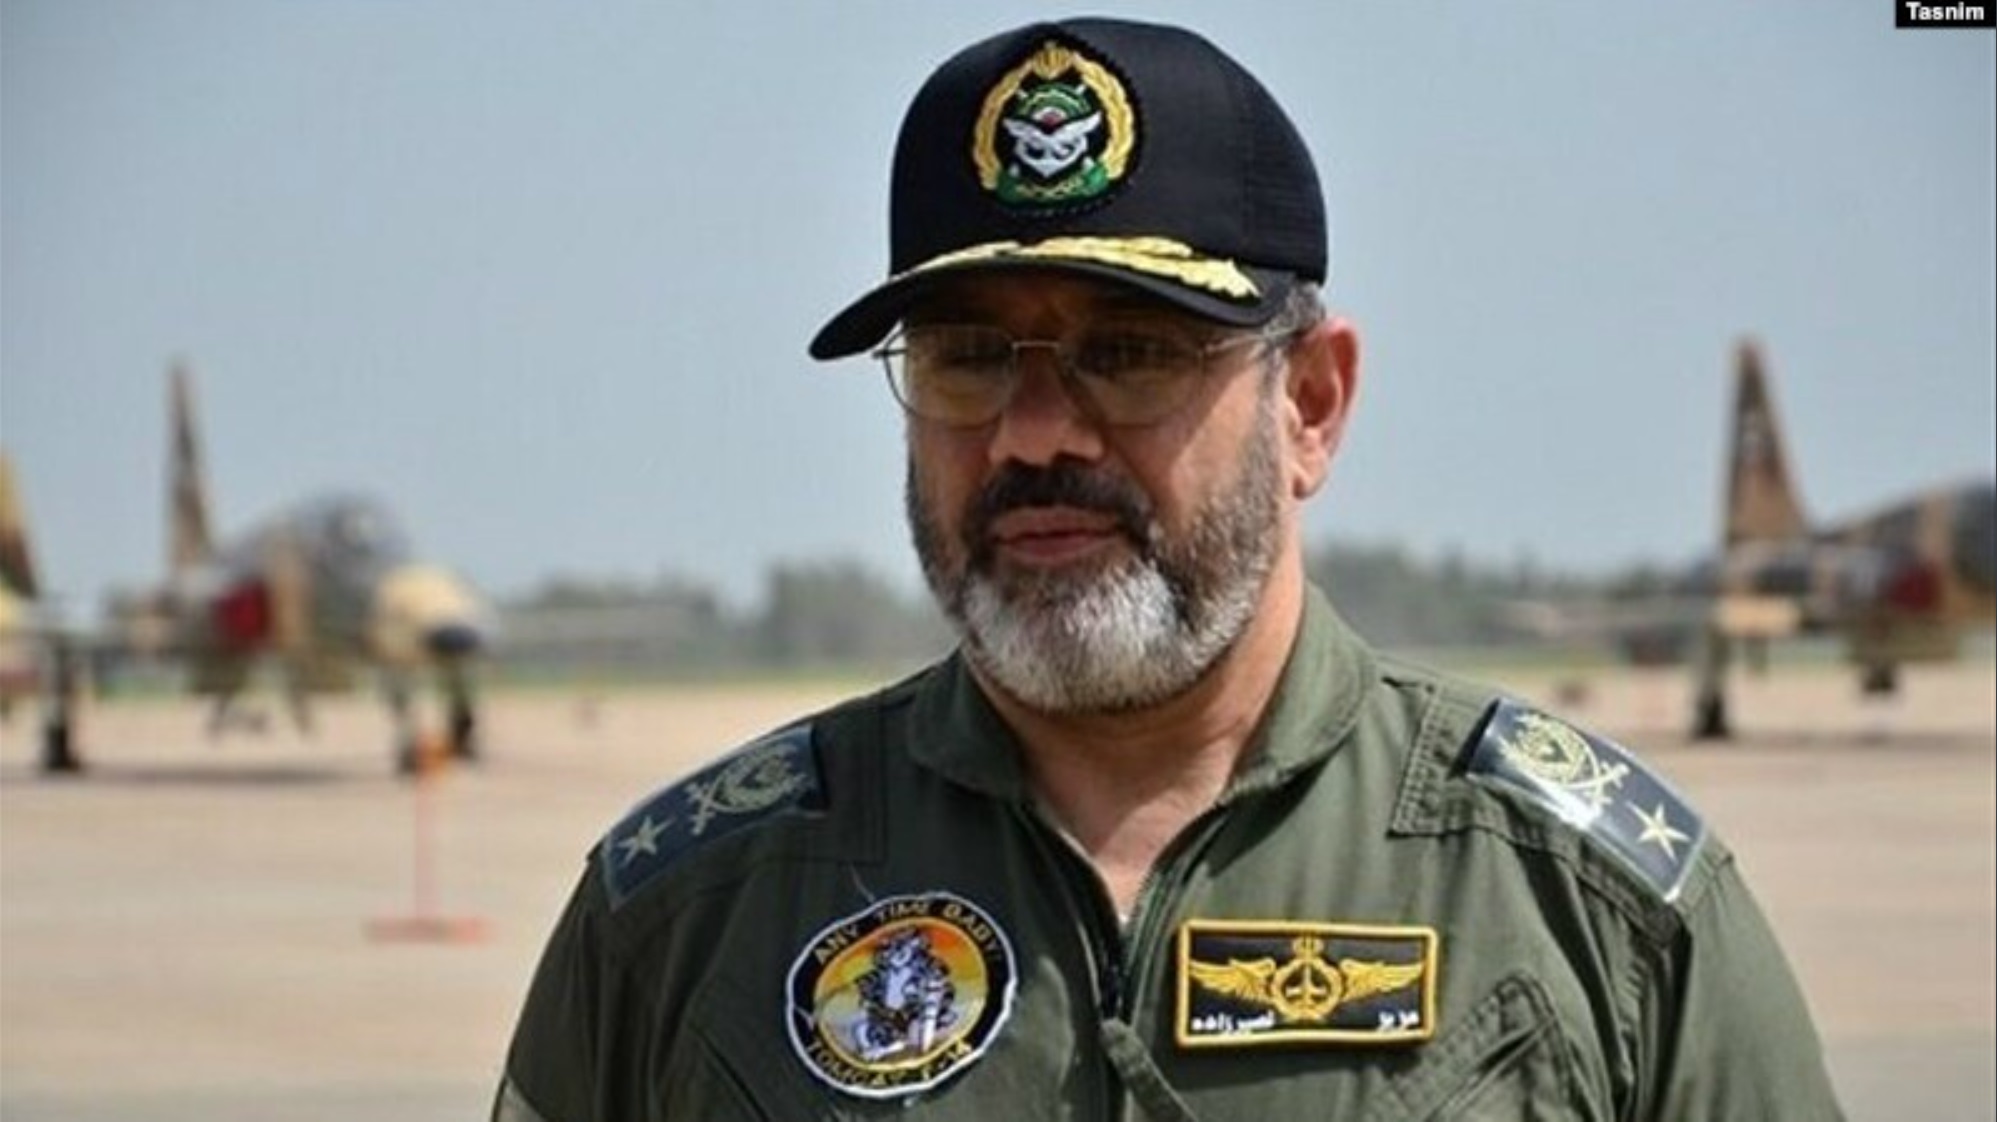 Iran’s Khamenei appoints new chief for air force